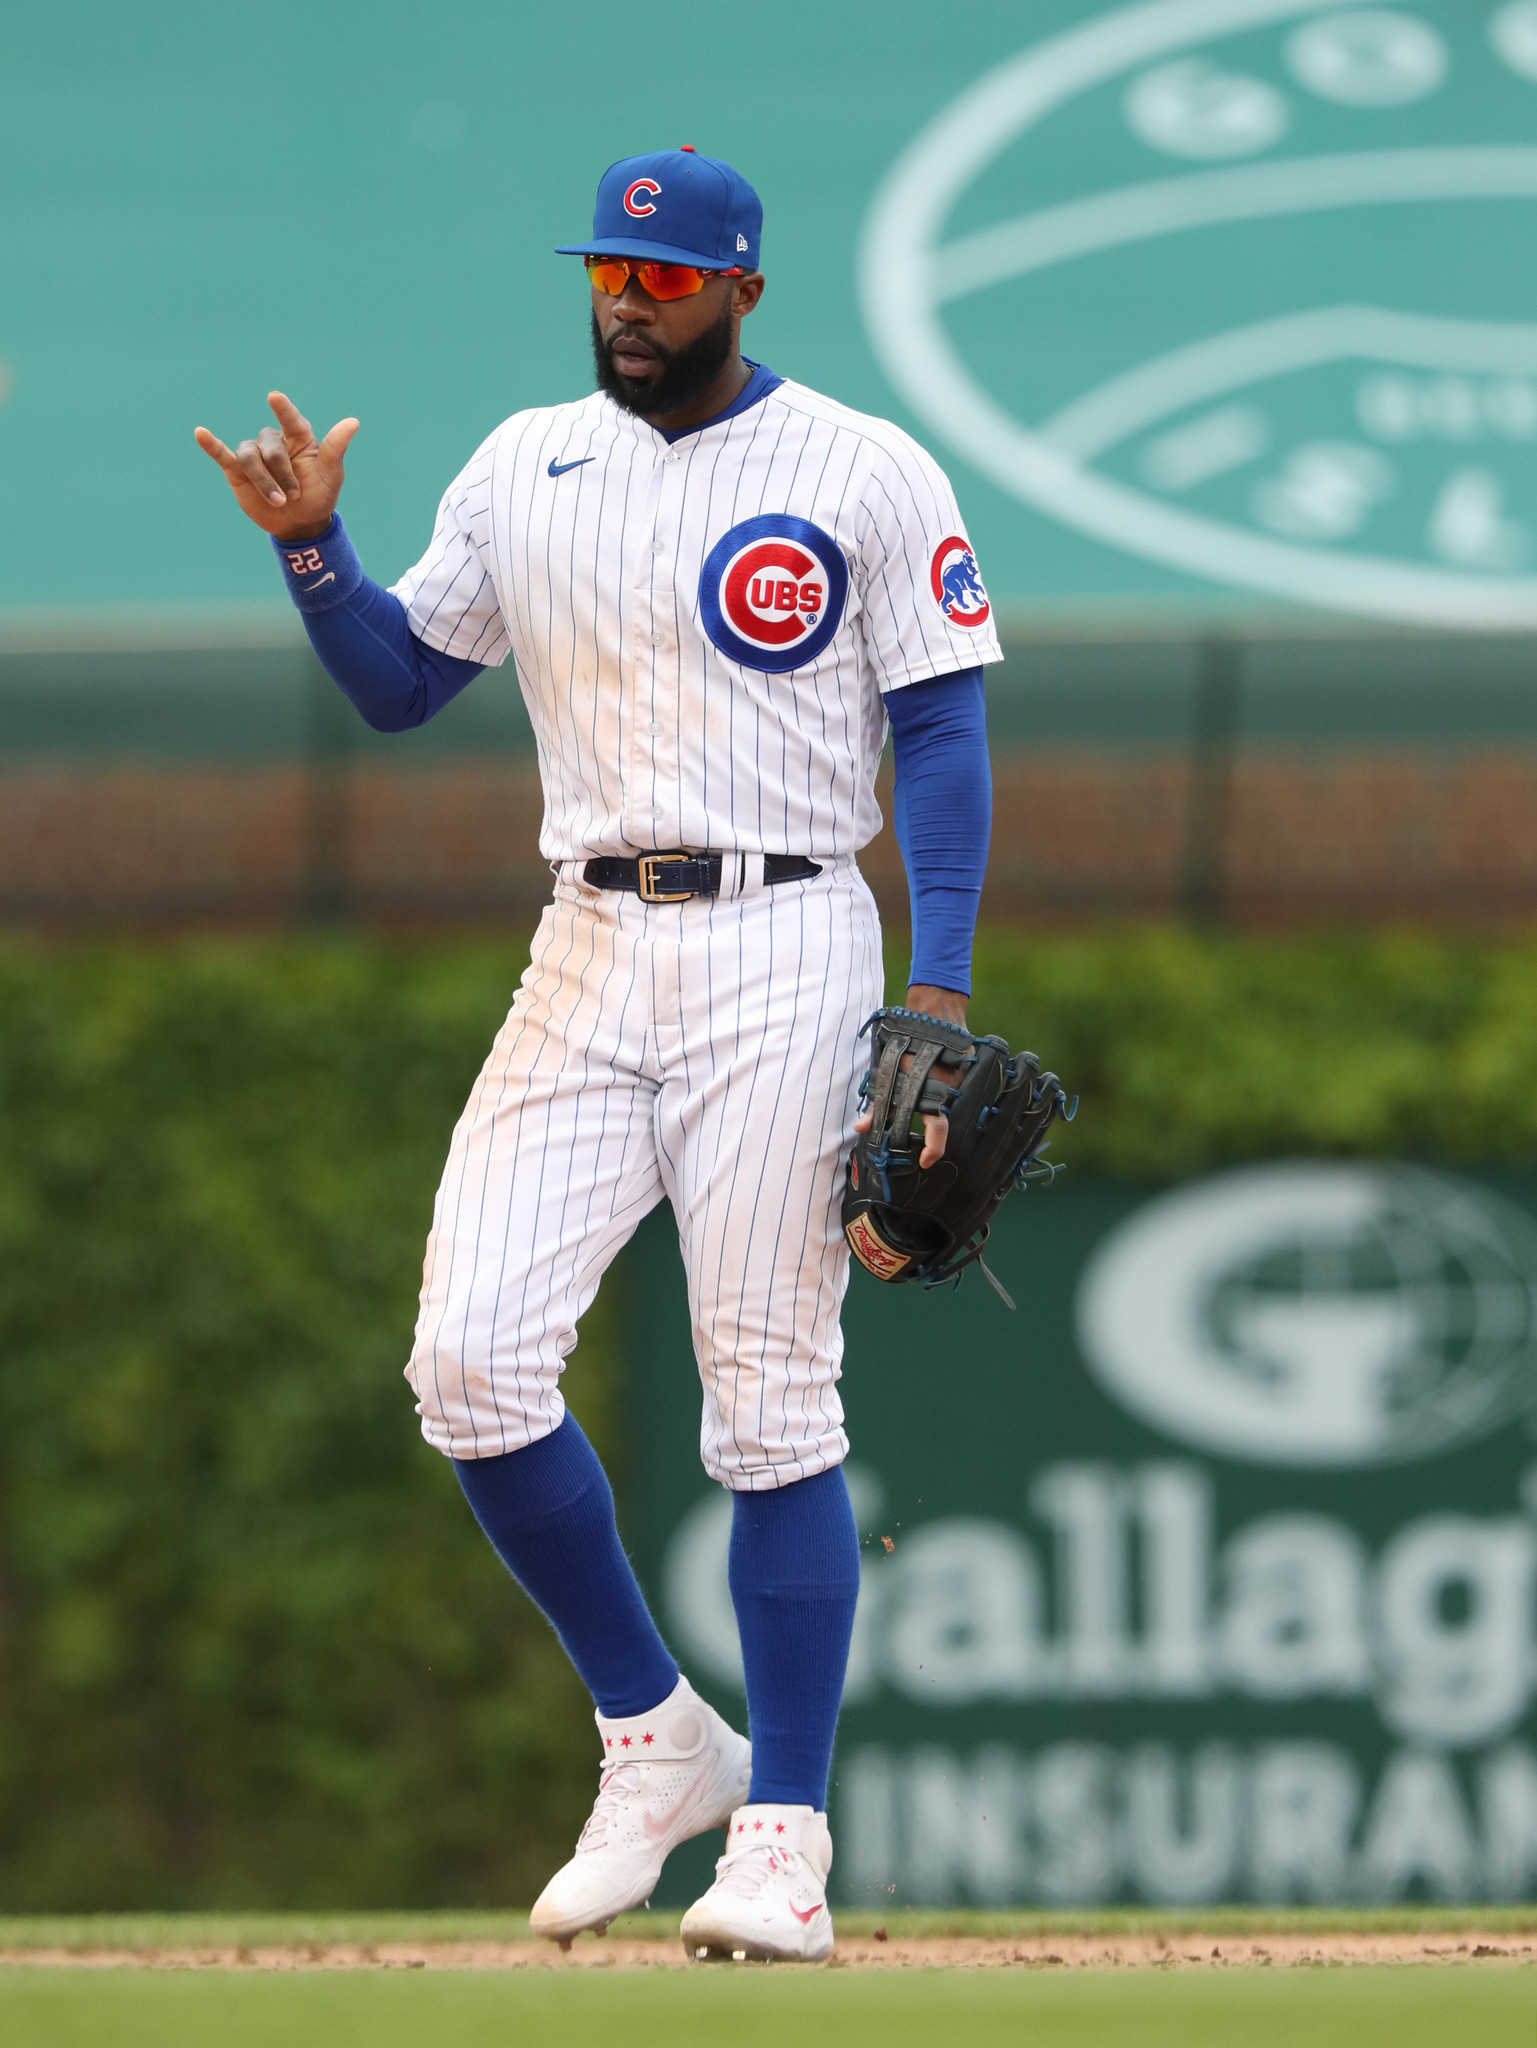 Jason Heyward energizes Dodgers with platoon-role production - Los